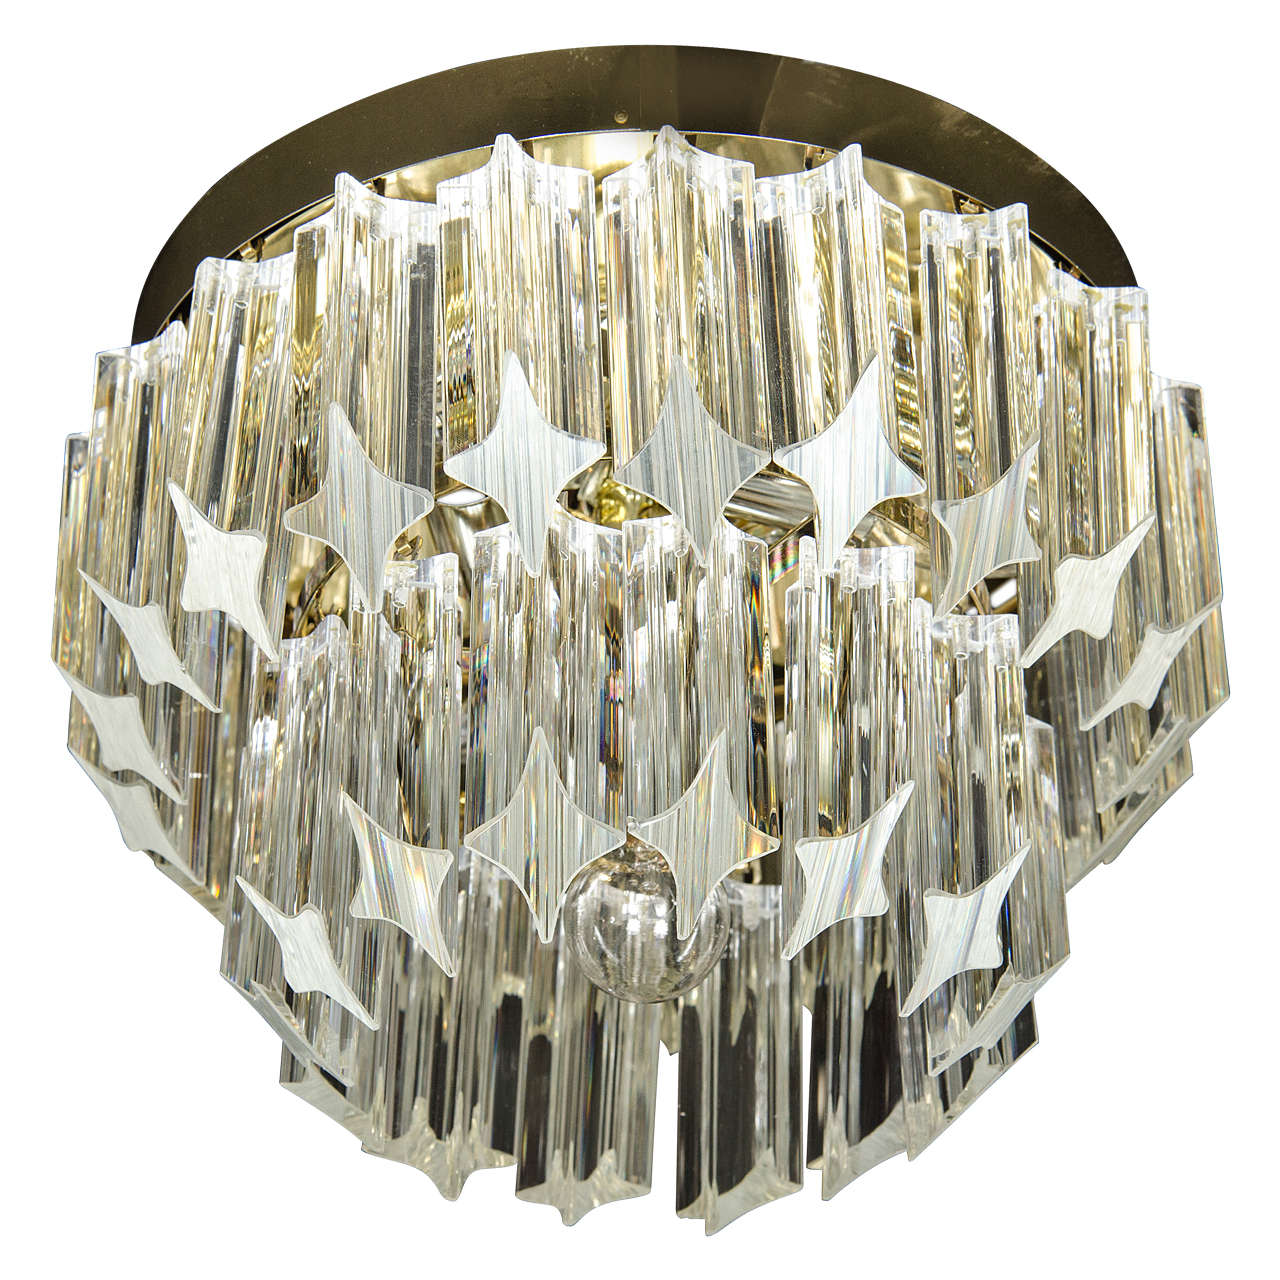 Mid-Century Modernist, Two-Tier Brass and Triedre Crystal Camer Flush Mount